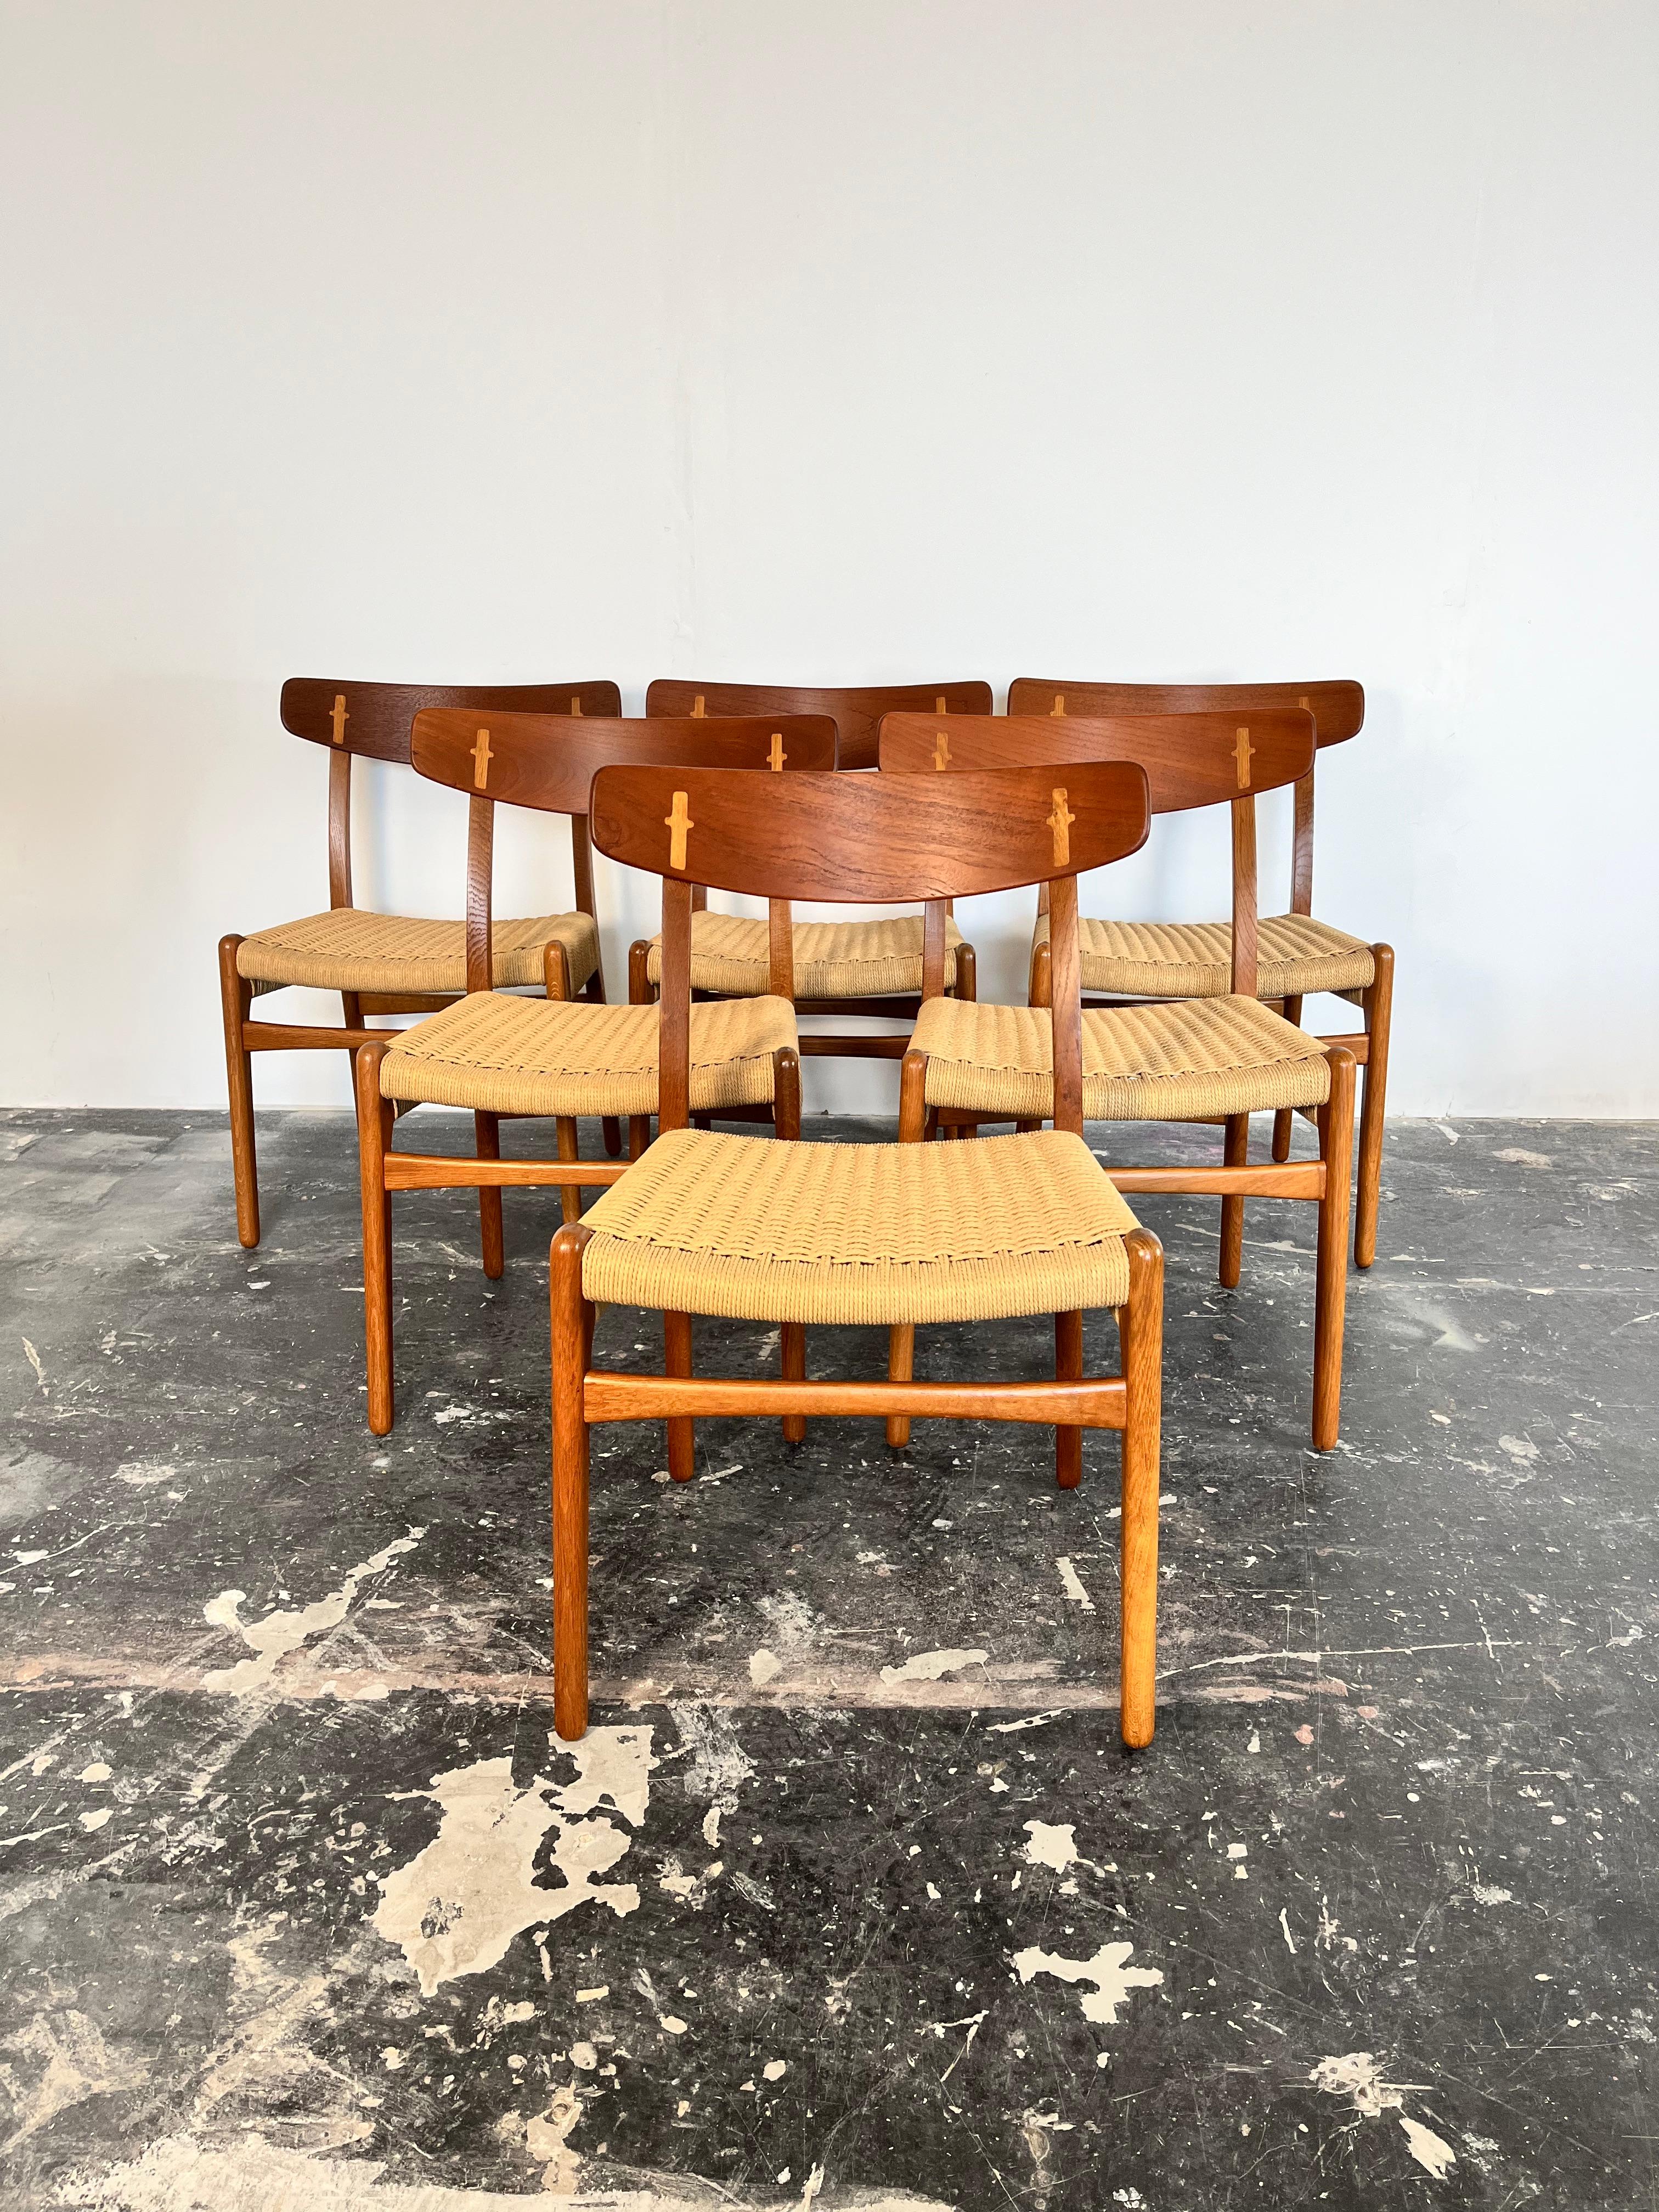 We have a set of 6 CH23 dining chairs designed by iconic furniture designer Hans J. Wegner for Carl Hansen & Søn in Denmark c. 1950’s. The oak and teak wood frames have been restored to excellent vintage condition to showcase the Wegnerian joinery